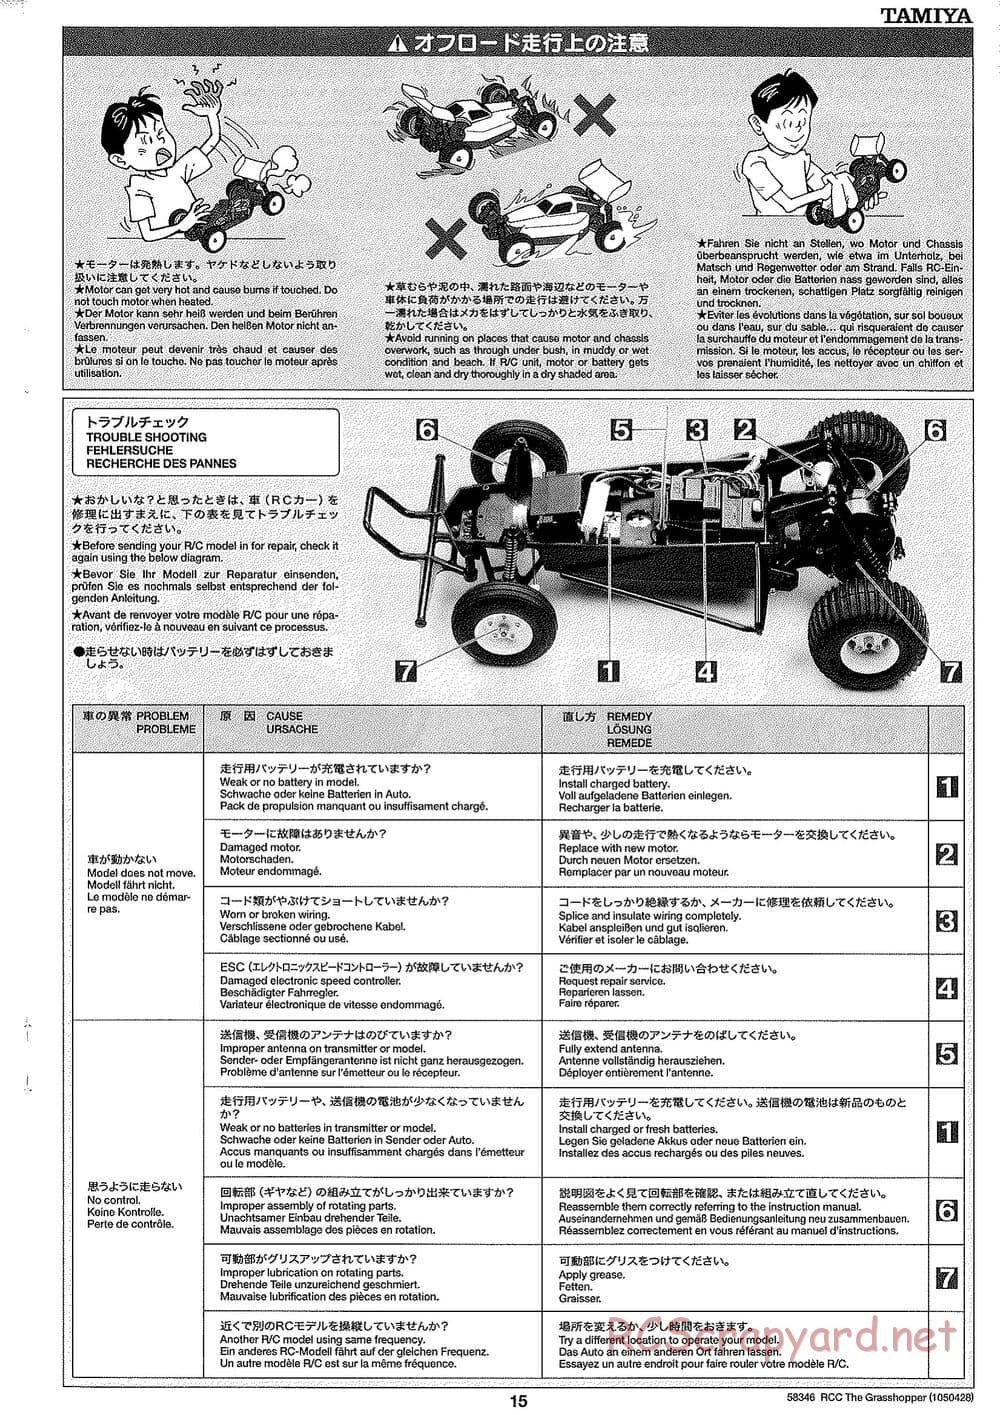 Tamiya - The Grasshopper (2005) - GH Chassis - Manual - Page 15